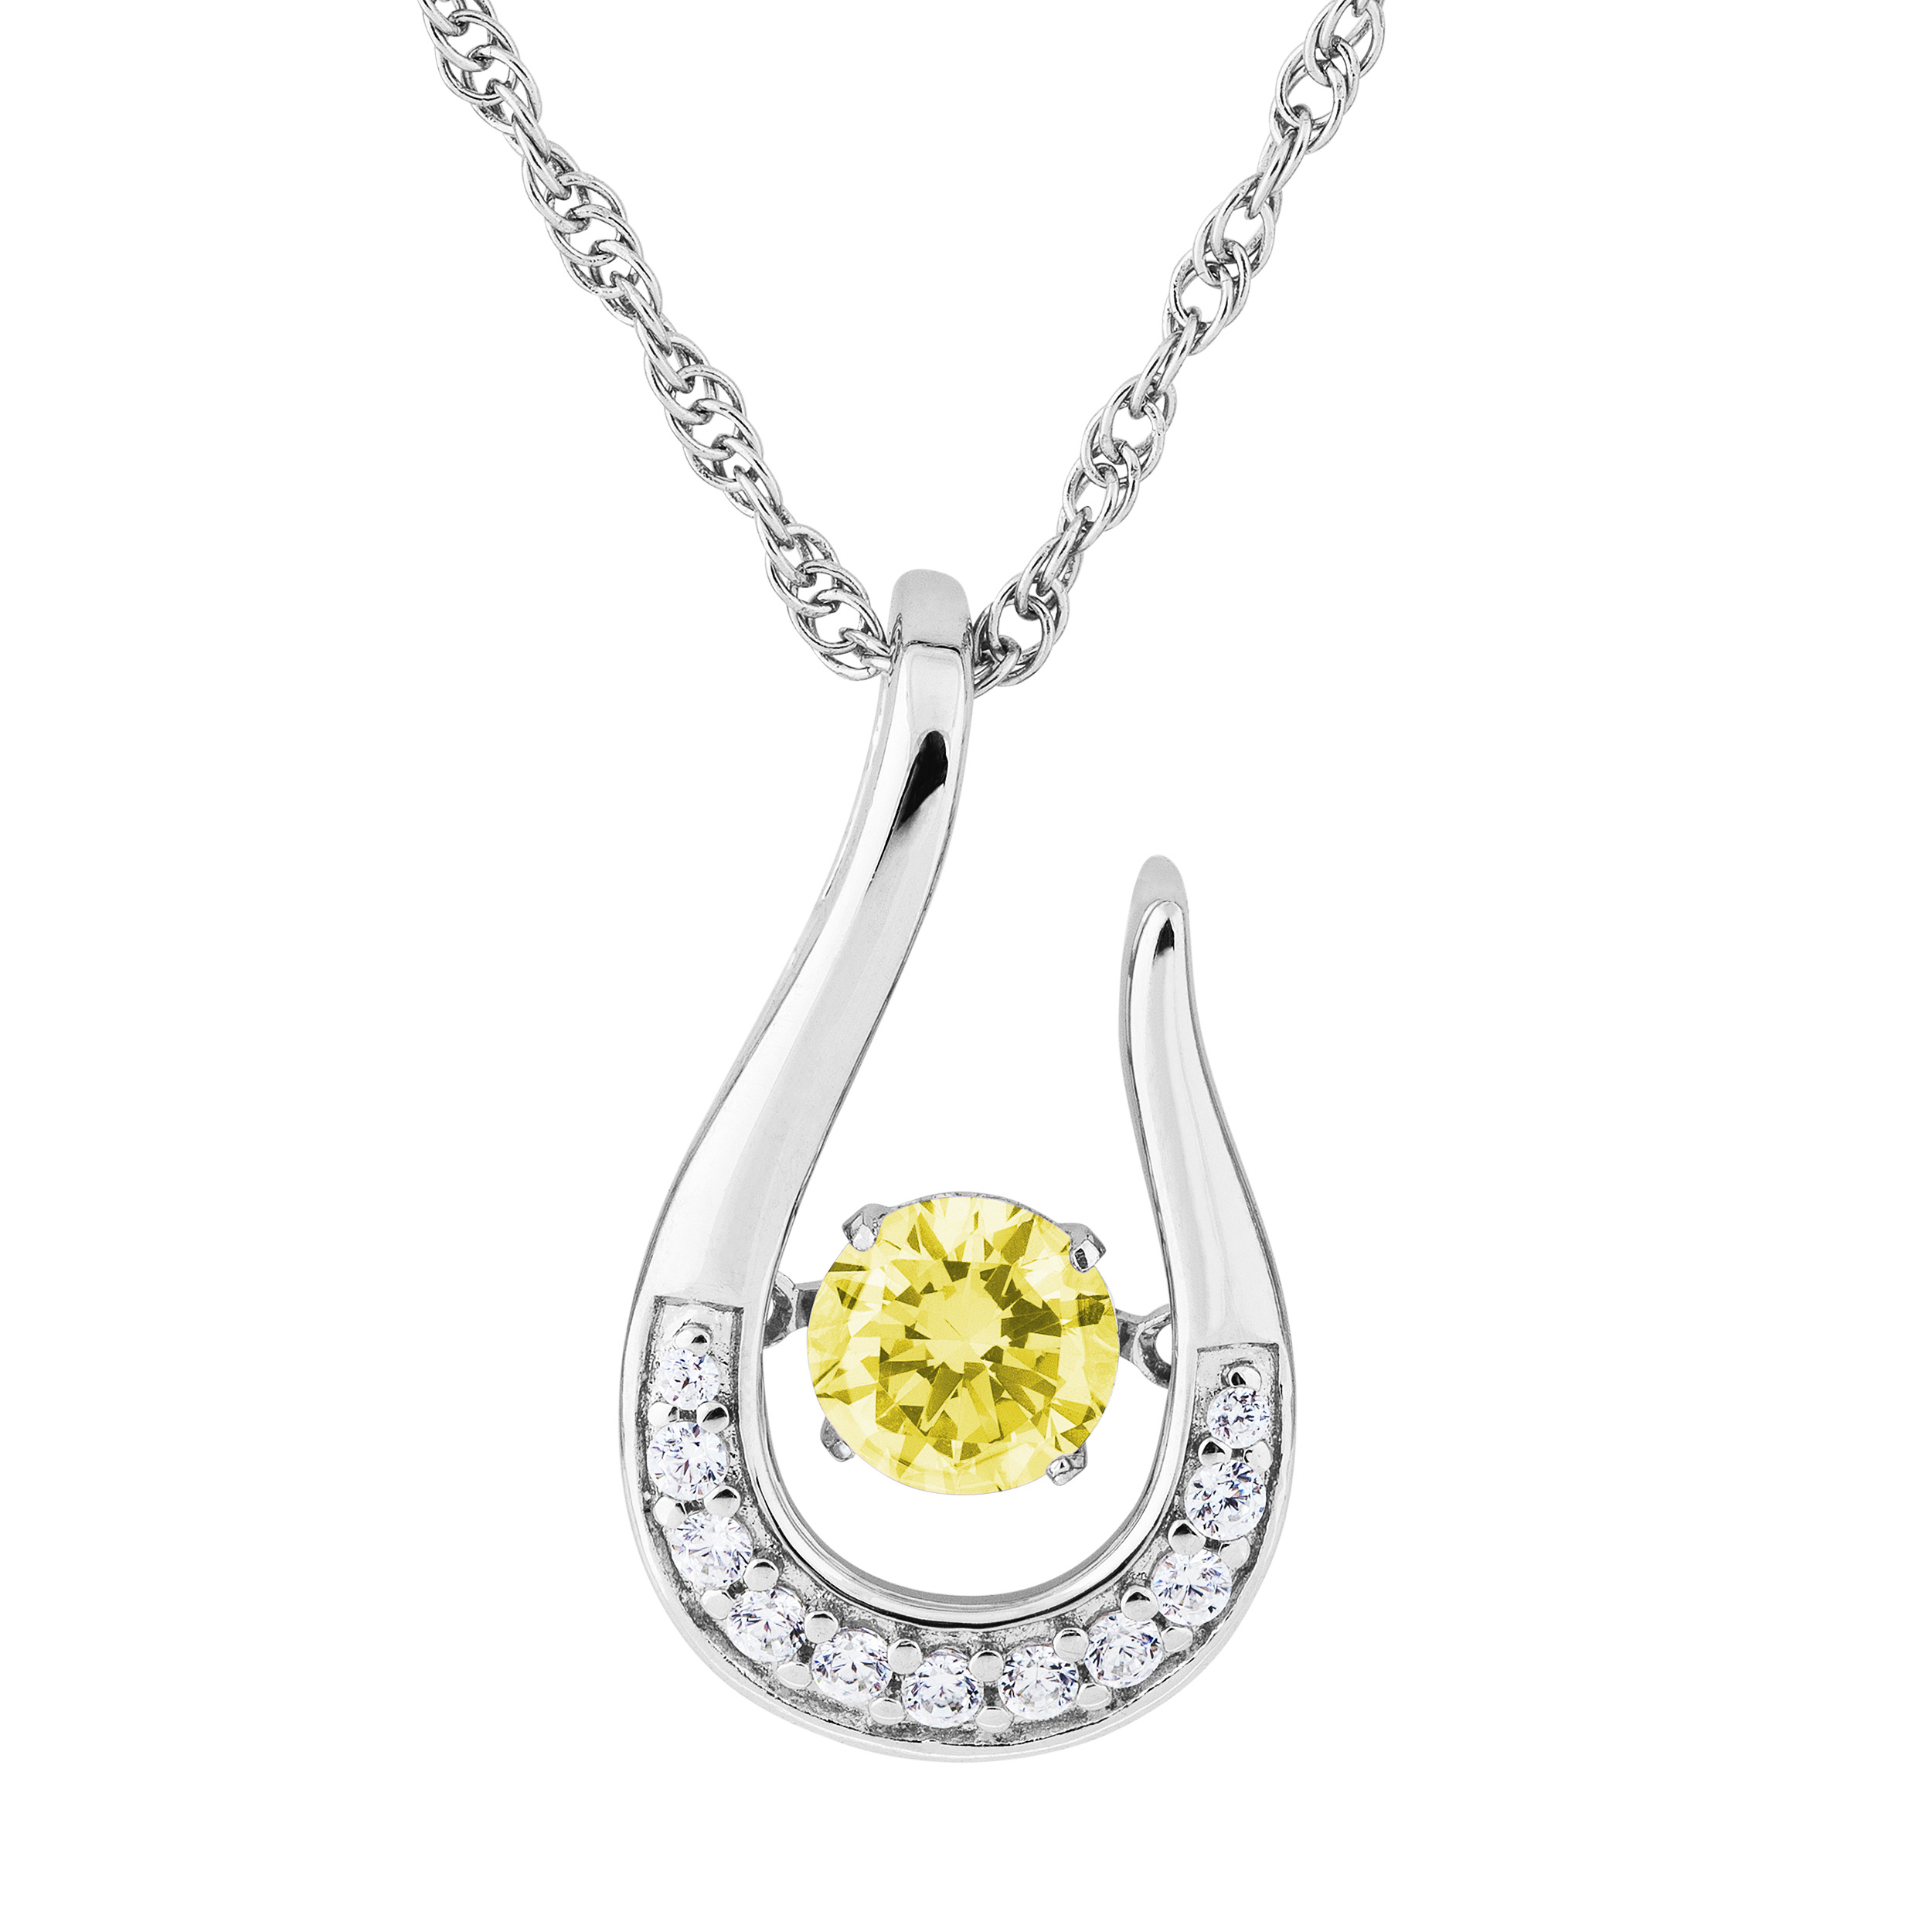 Gold Topaz CZ with Cubic Zirconia November Teardrop Pendant Necklace, Rhodium Plated Sterling Silver, 18